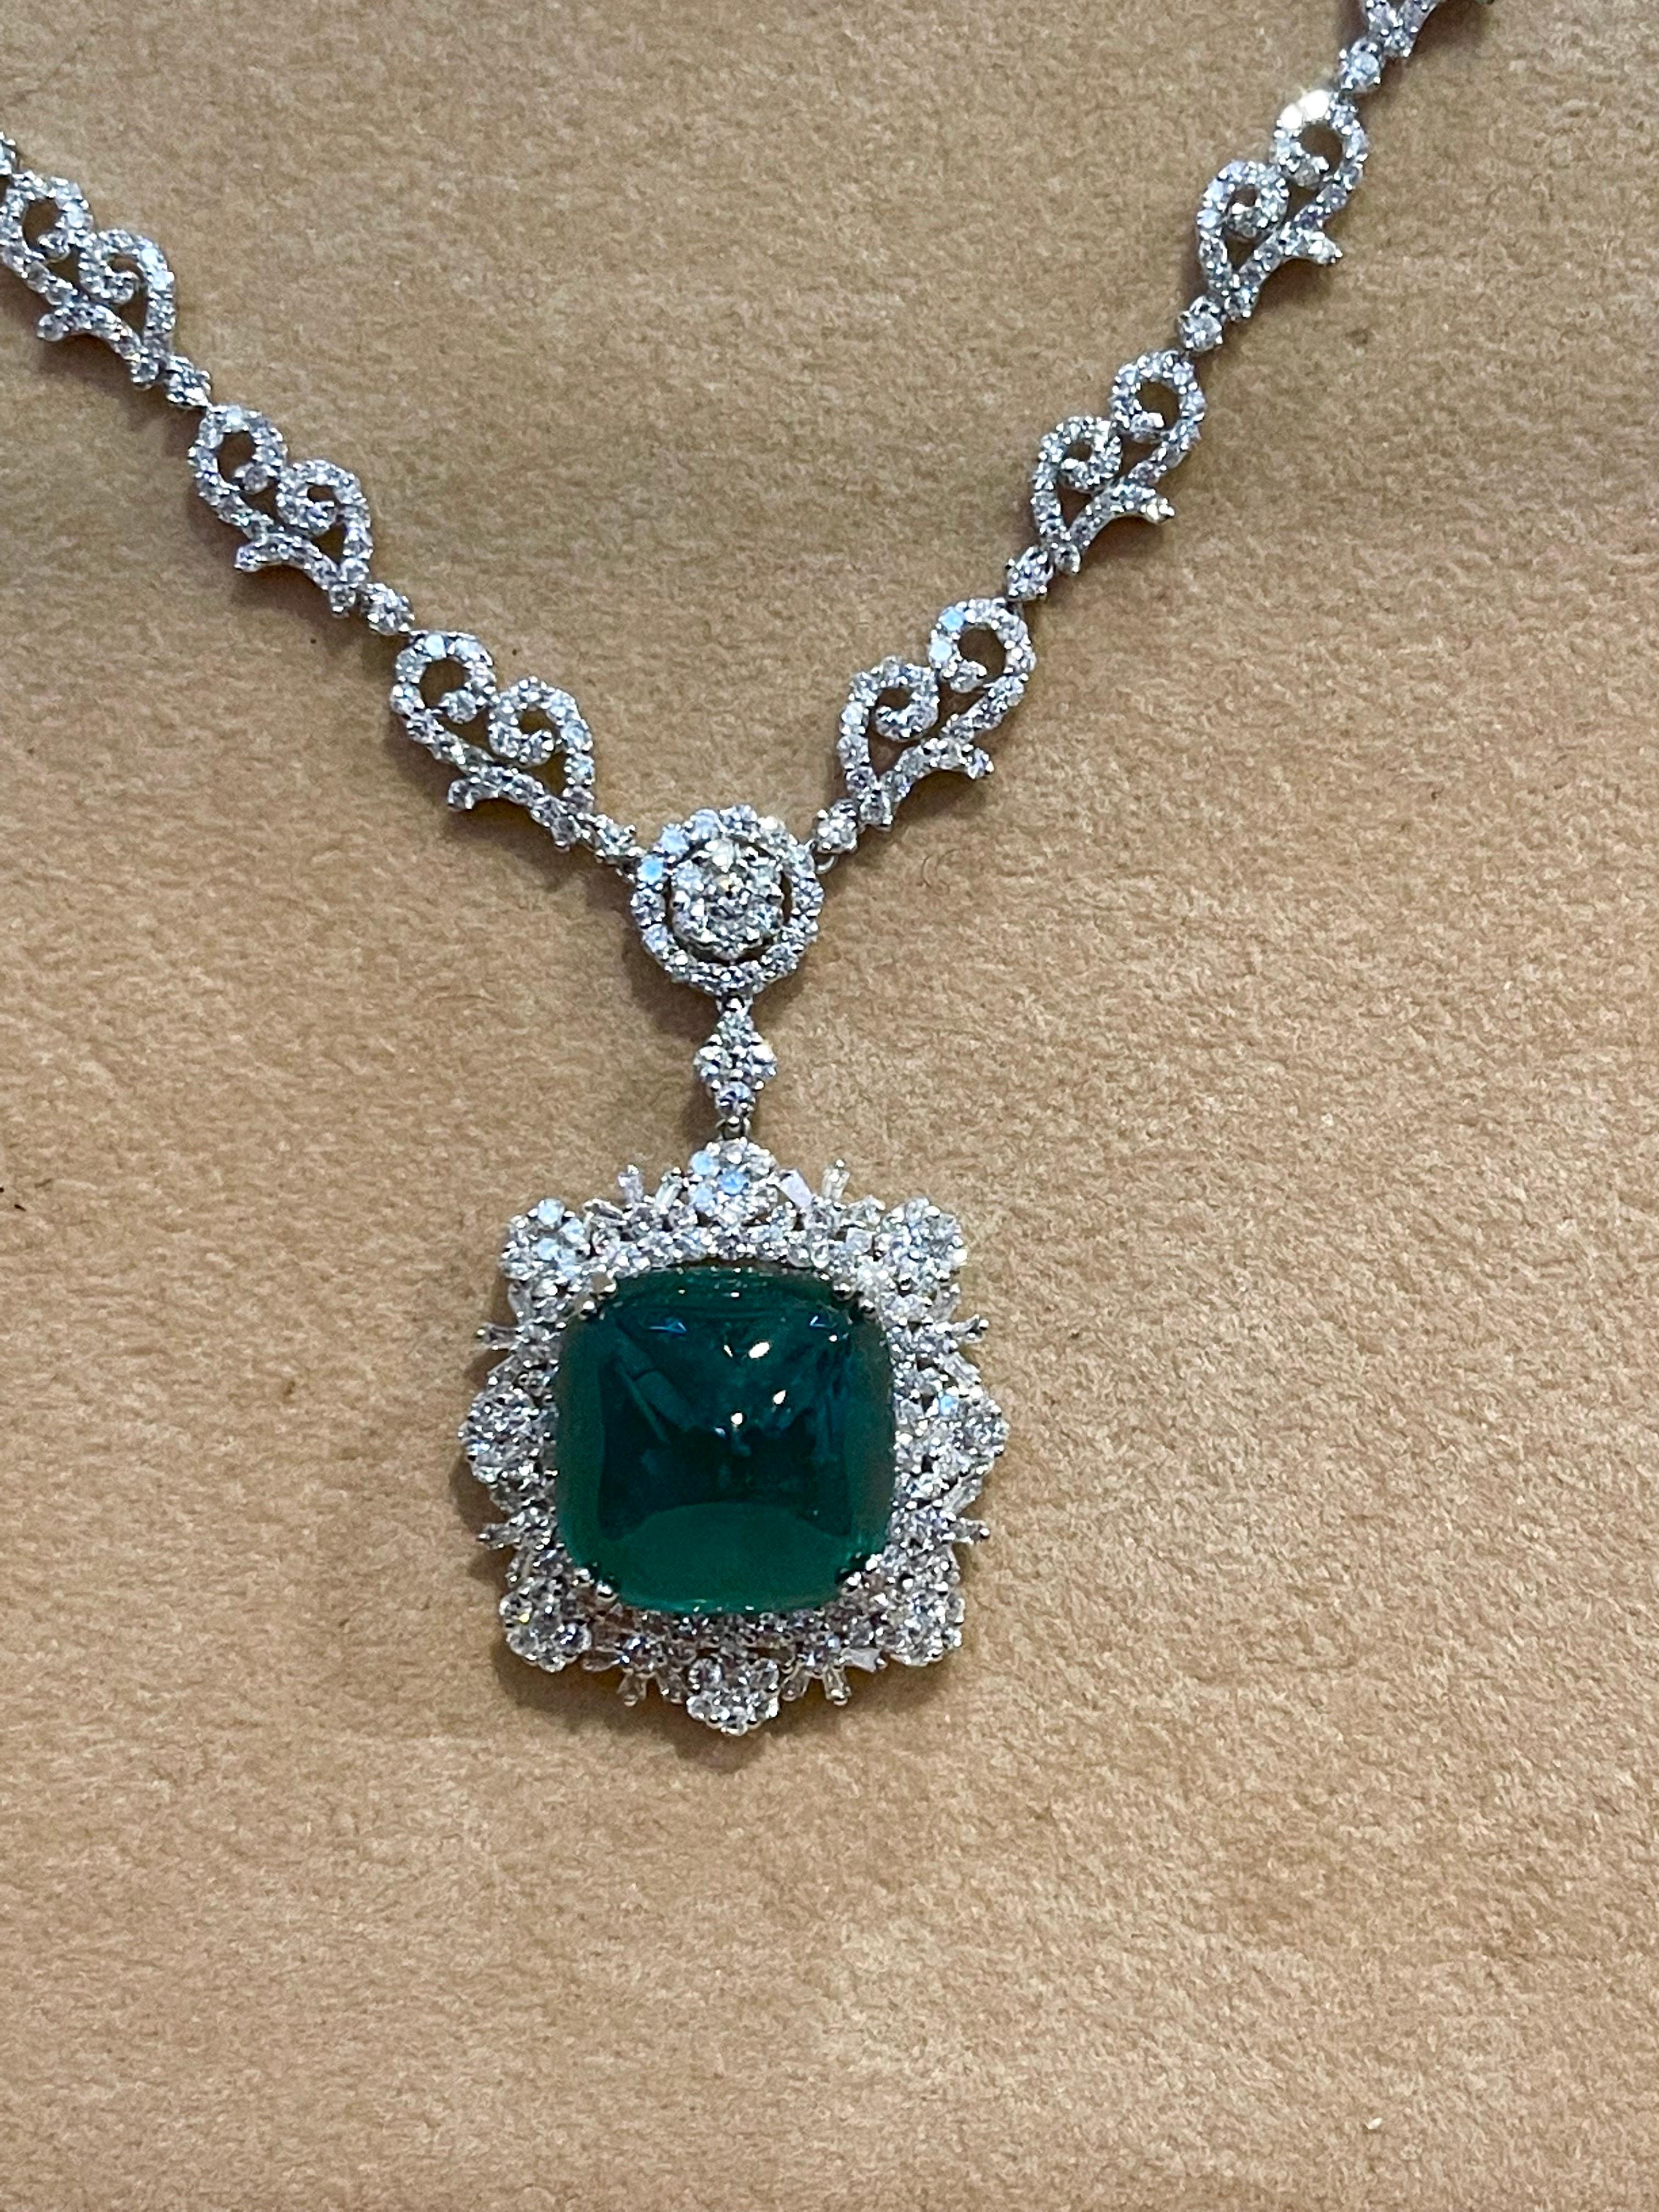 Sugarloaf Cabochon GIA 17 Ct Sugar Loaf Cabochon Colombian Emerald & 13 Ct Diamond Necklace 18KWG For Sale